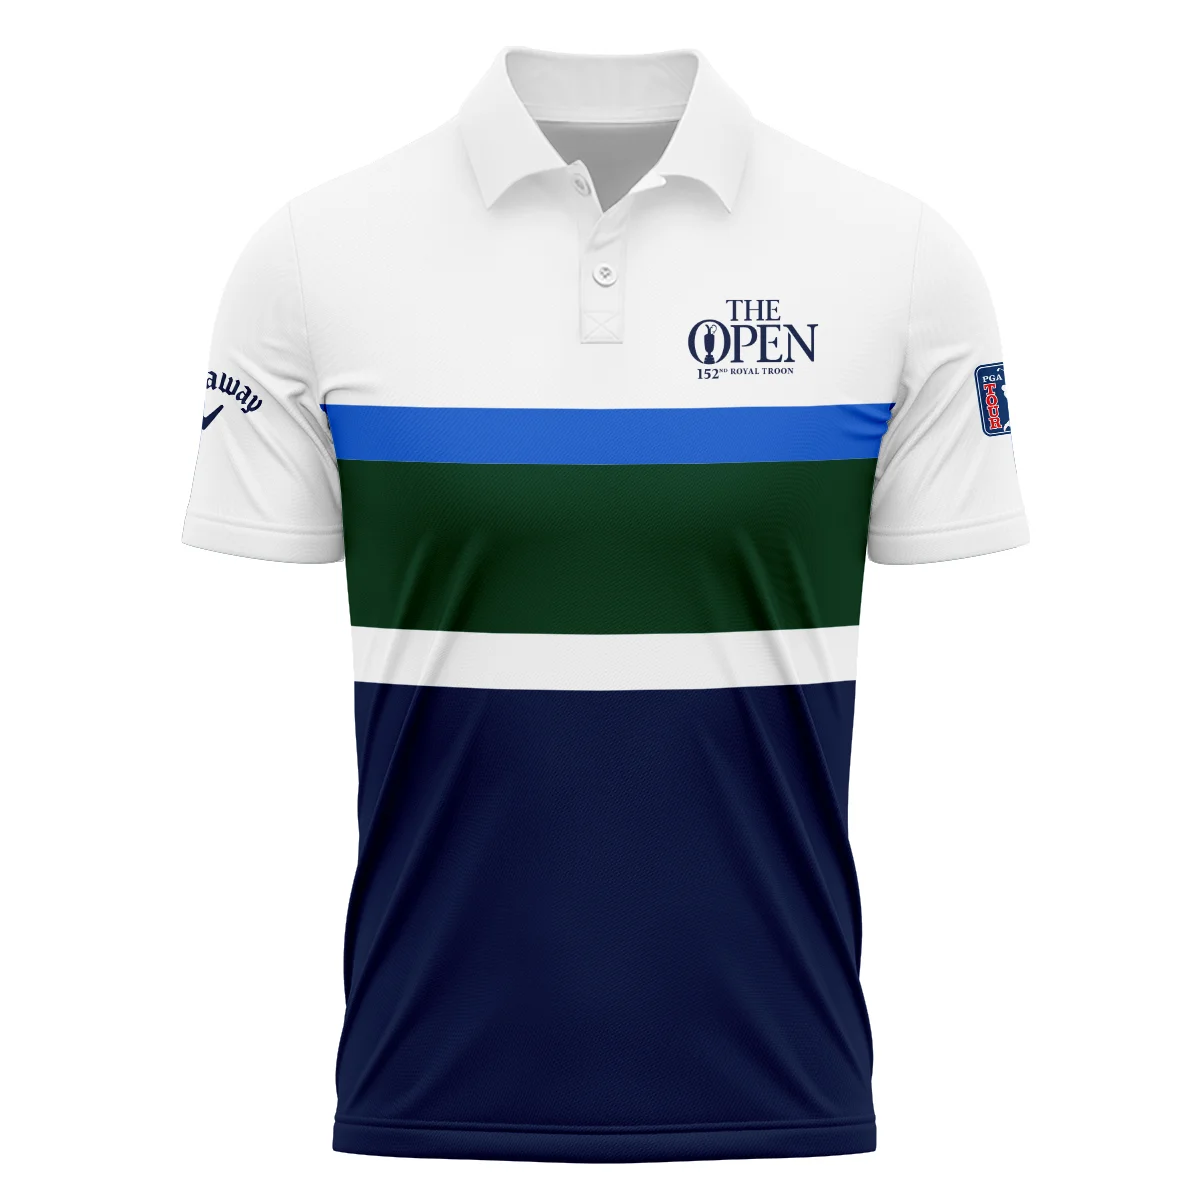 White Blue Green Background Callaway 152nd Open Championship Zipper Polo Shirt All Over Prints HOTOP270624A01CLWZPL